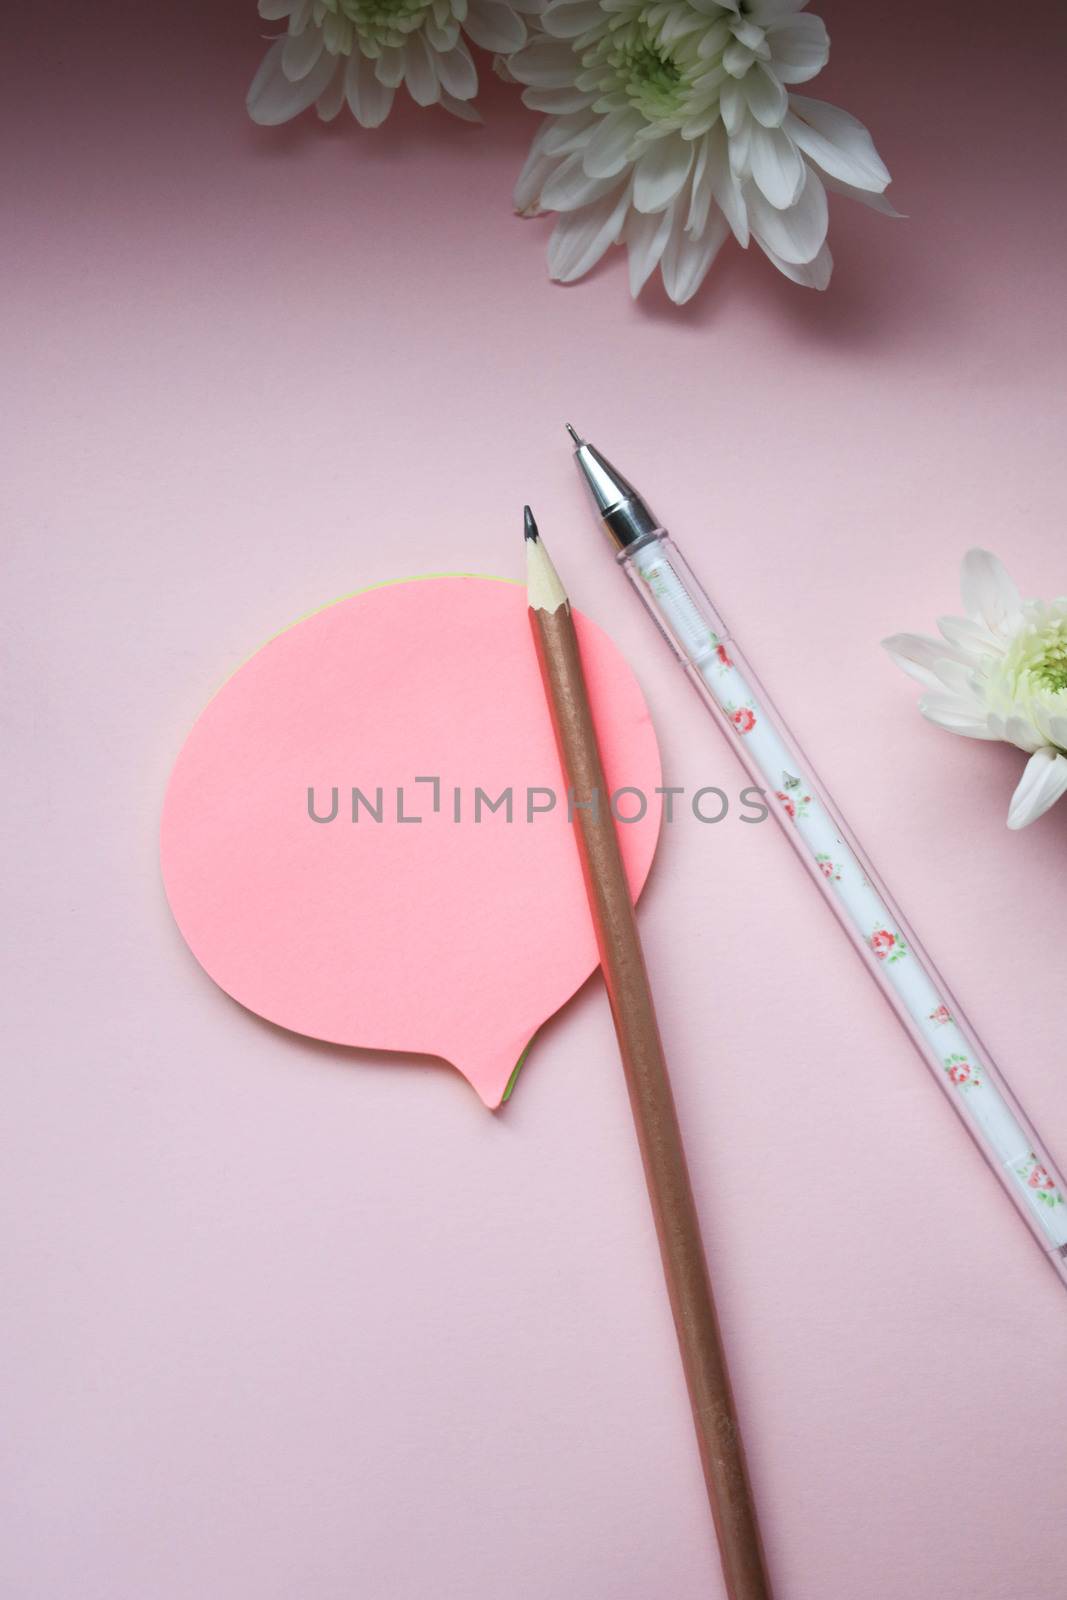 Pink stickers with a simple pencil and pen, on top are chrysanthemum flowers. The handle is white on the outside with pink patterns